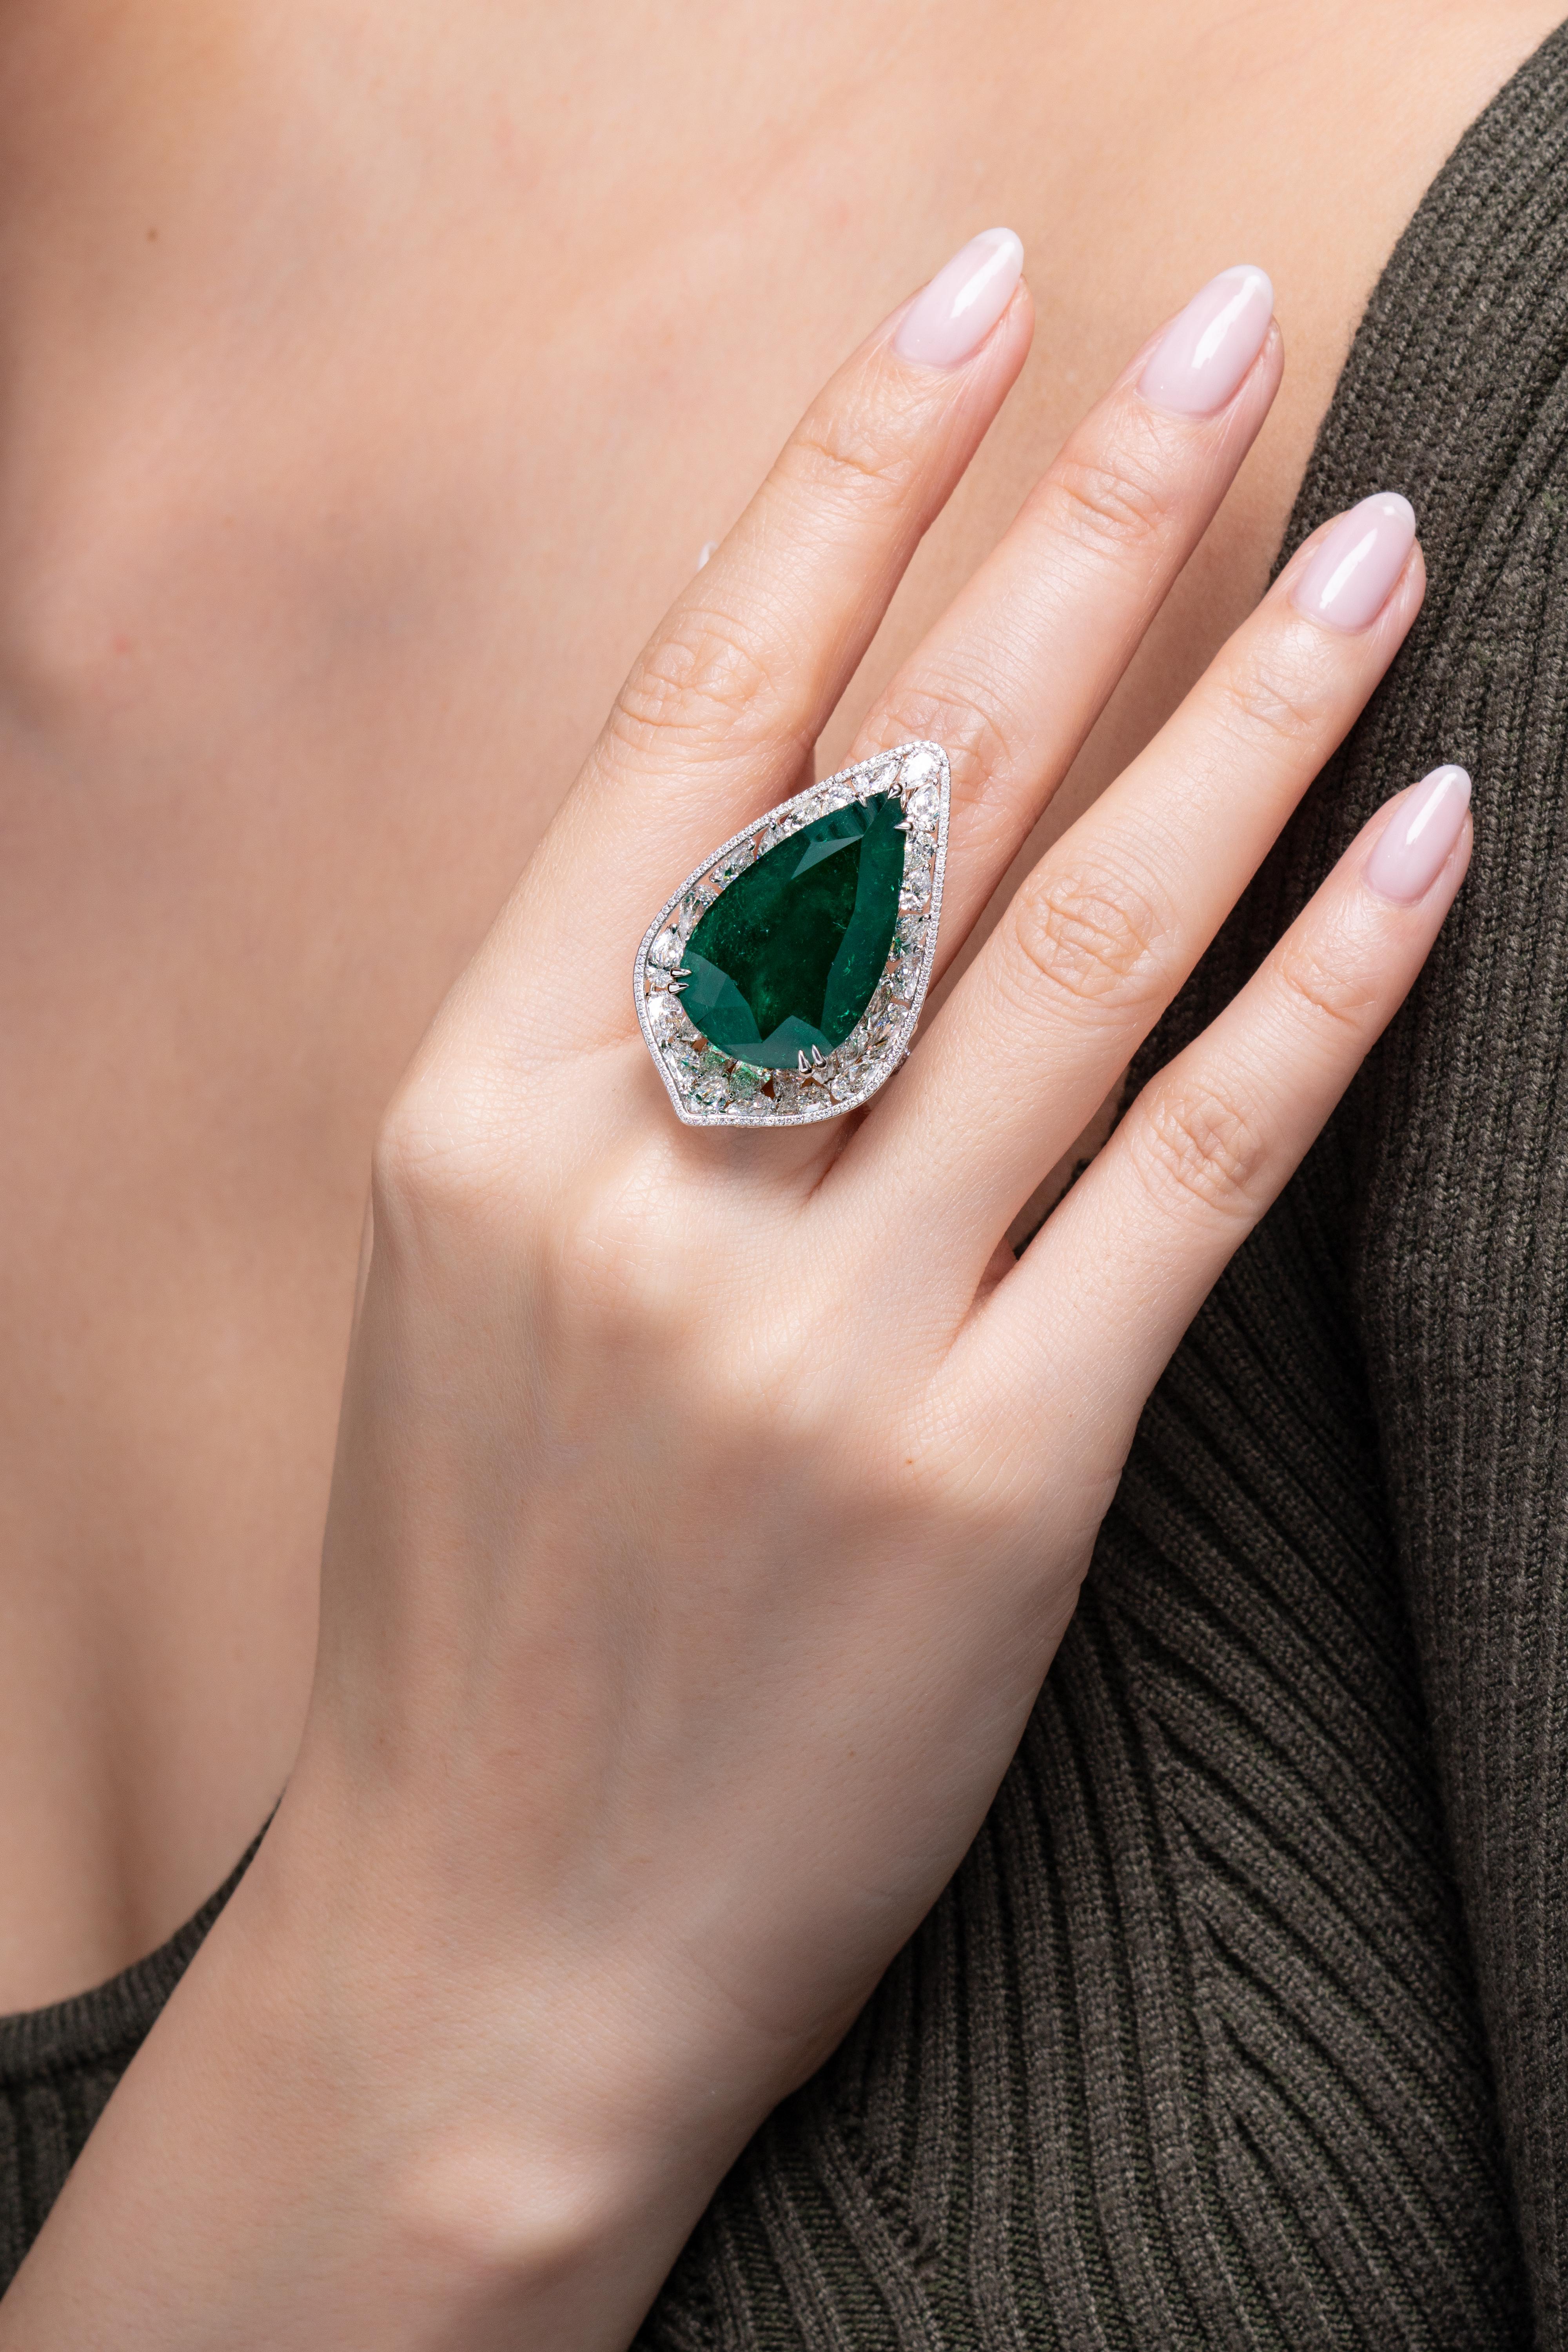 The regal nature of the emerald gemstone is undeniable. From Cleopatra to Elizabeth Taylor, emeralds have captivated the eyes of many leading ladies throughout history. Here is an exquisite 21.33 carat pear shape Colombian Emerald that has been